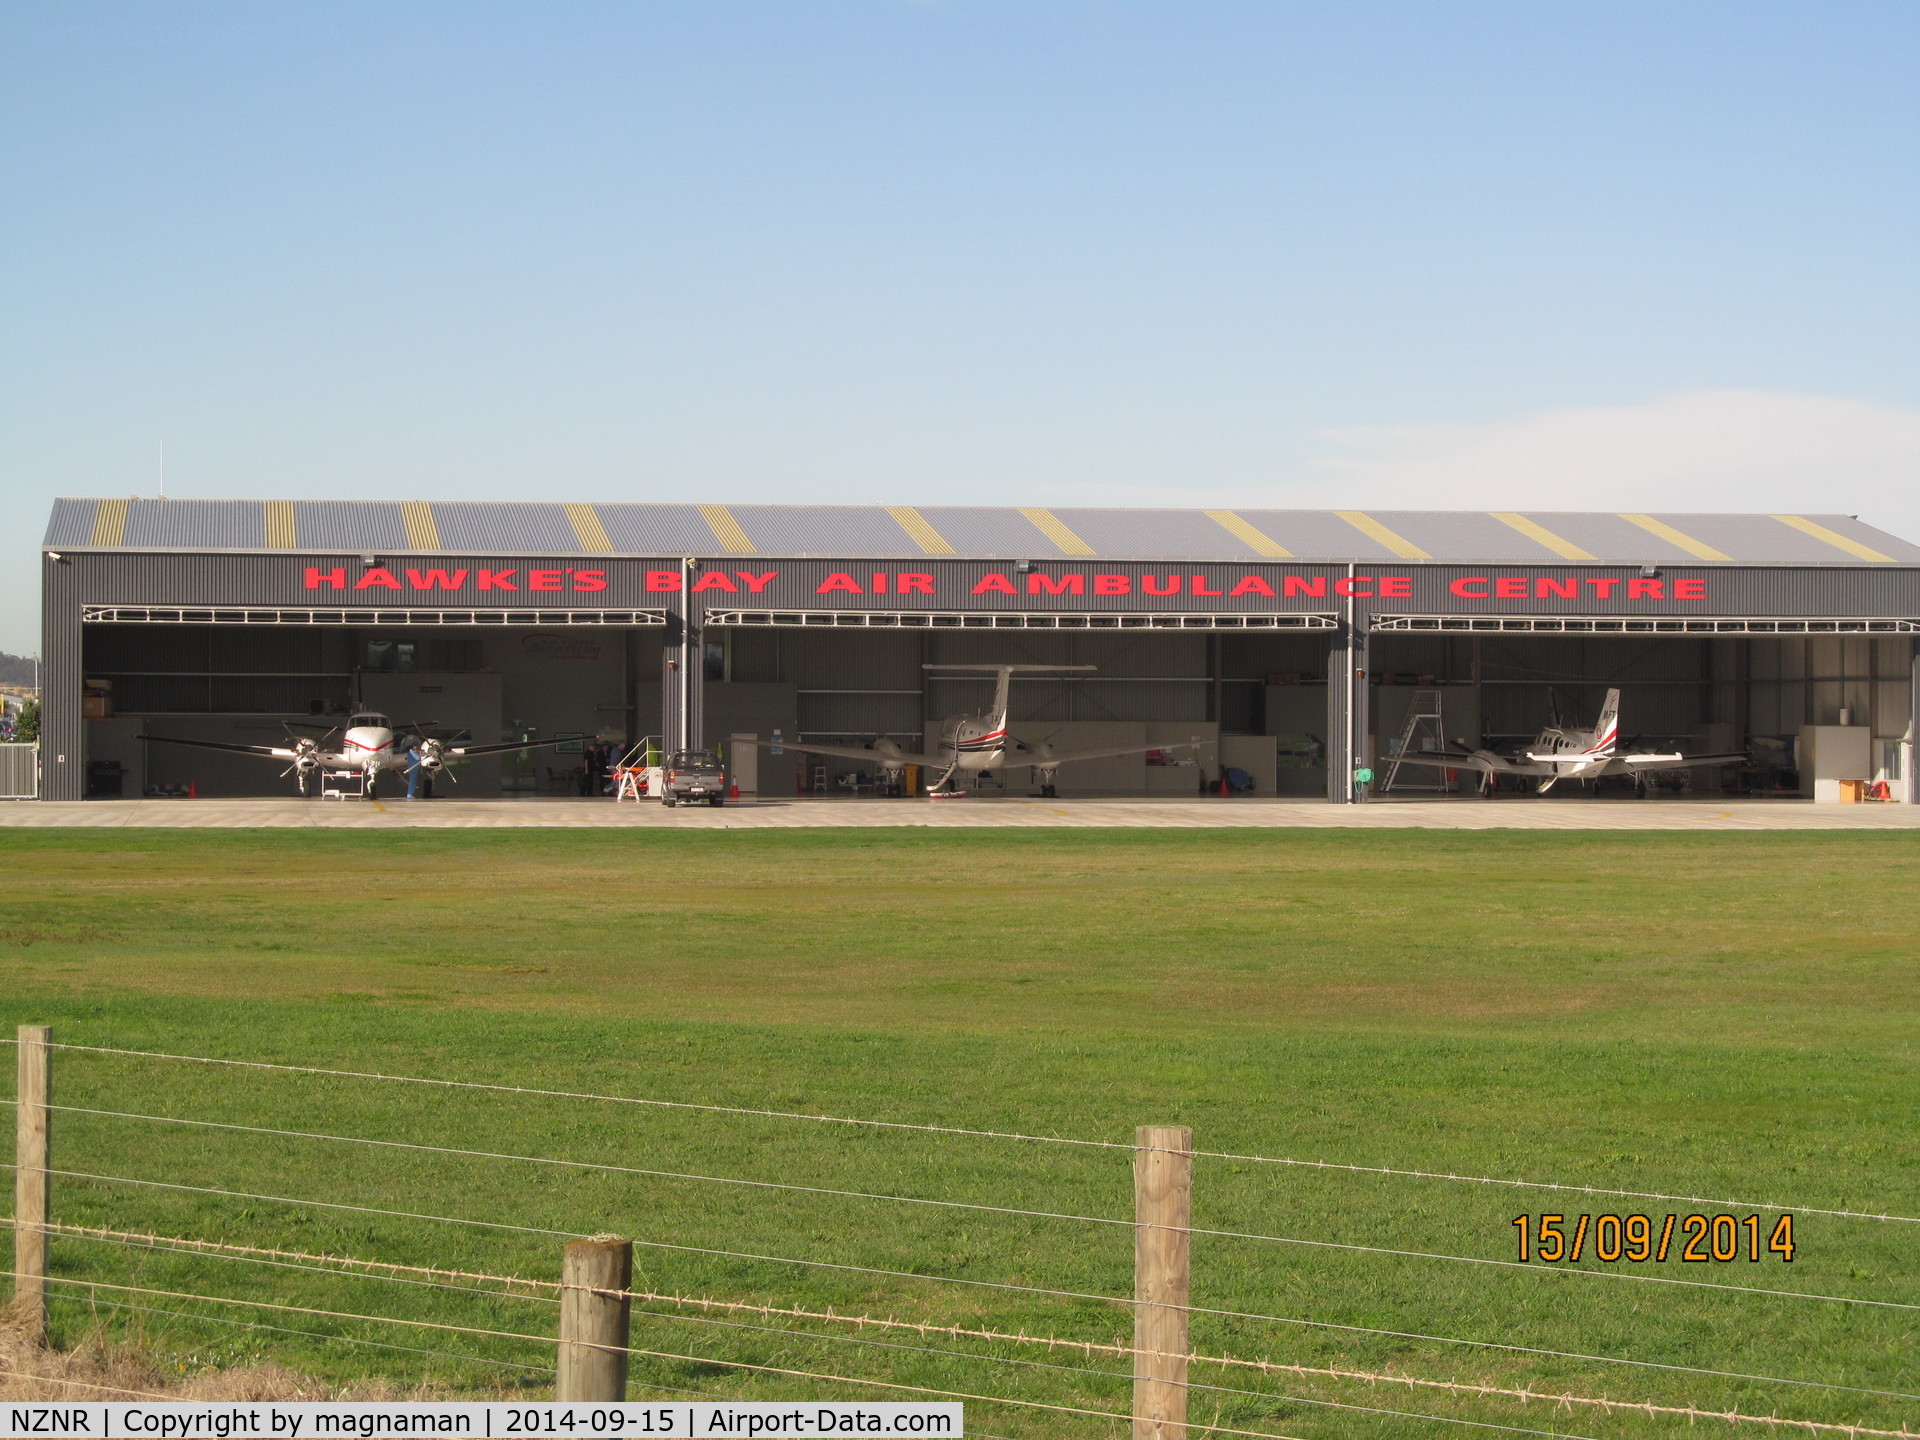 Napier Airport, Napier New Zealand (NZNR) - air ambulance hangar visible from layby on main road